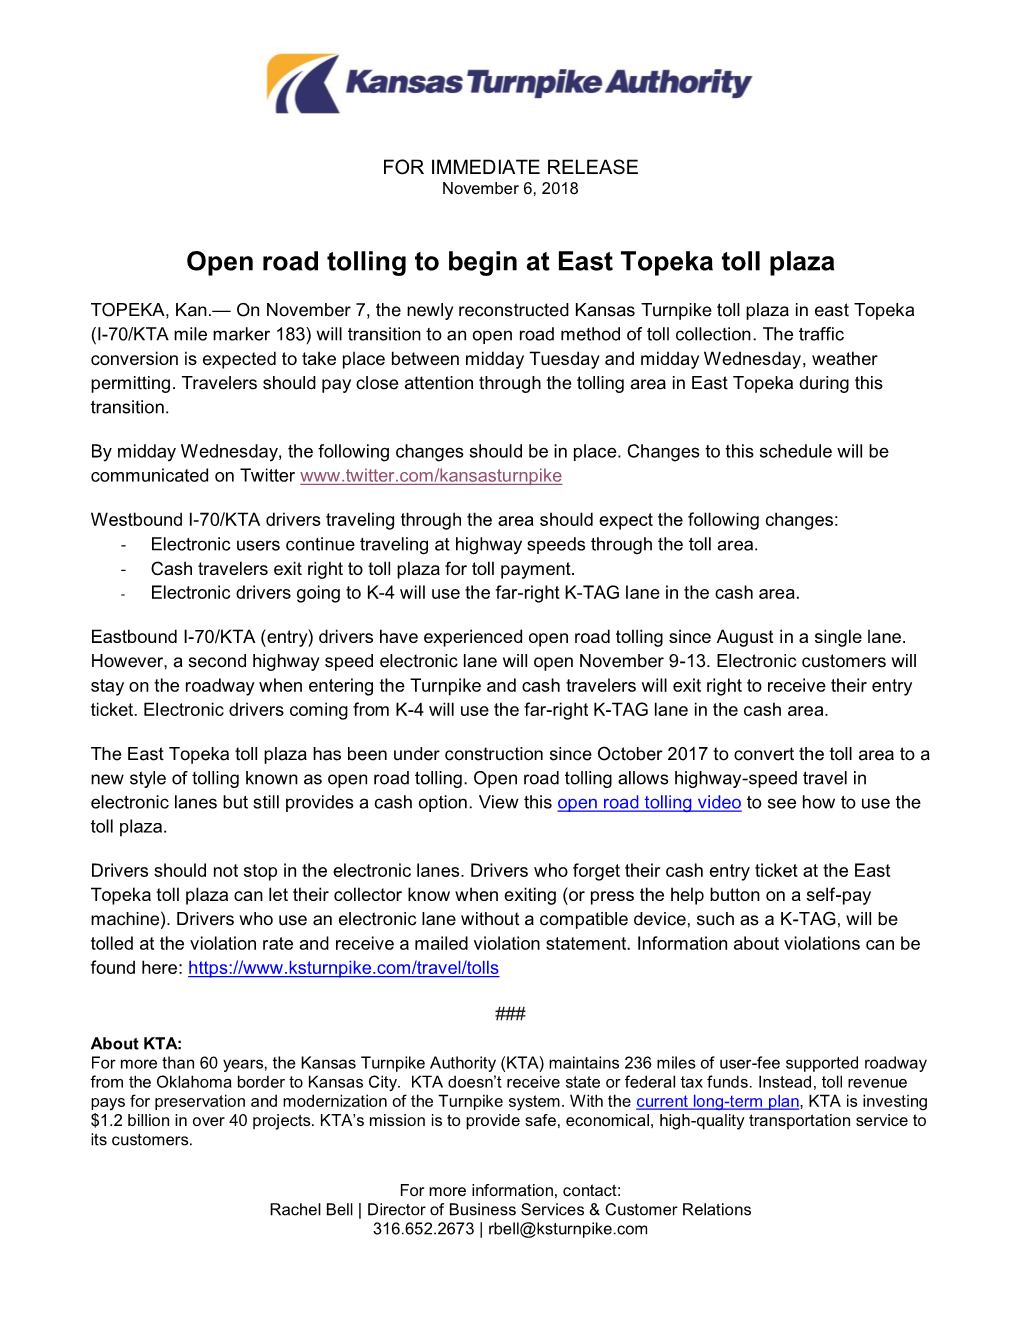 Open Road Tolling to Begin at East Topeka Toll Plaza